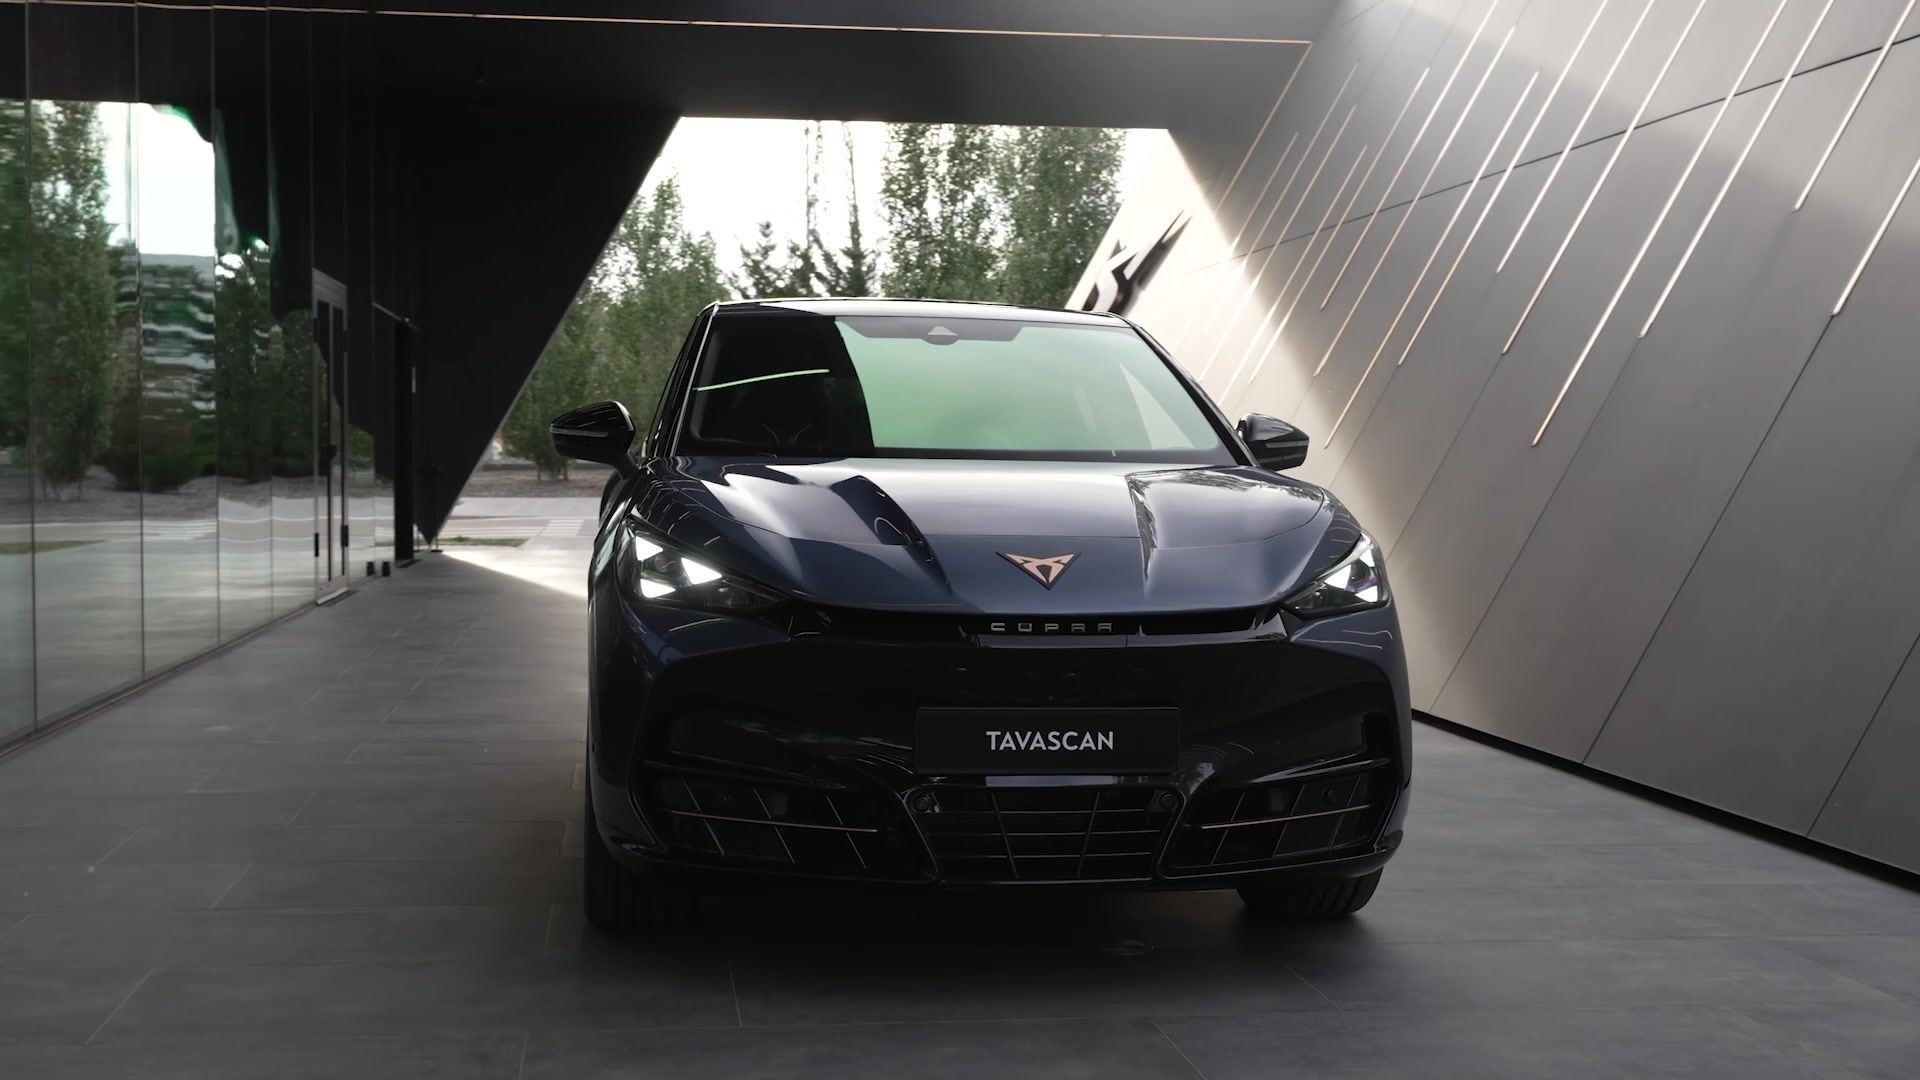 The new Cupra Tavascan Design preview